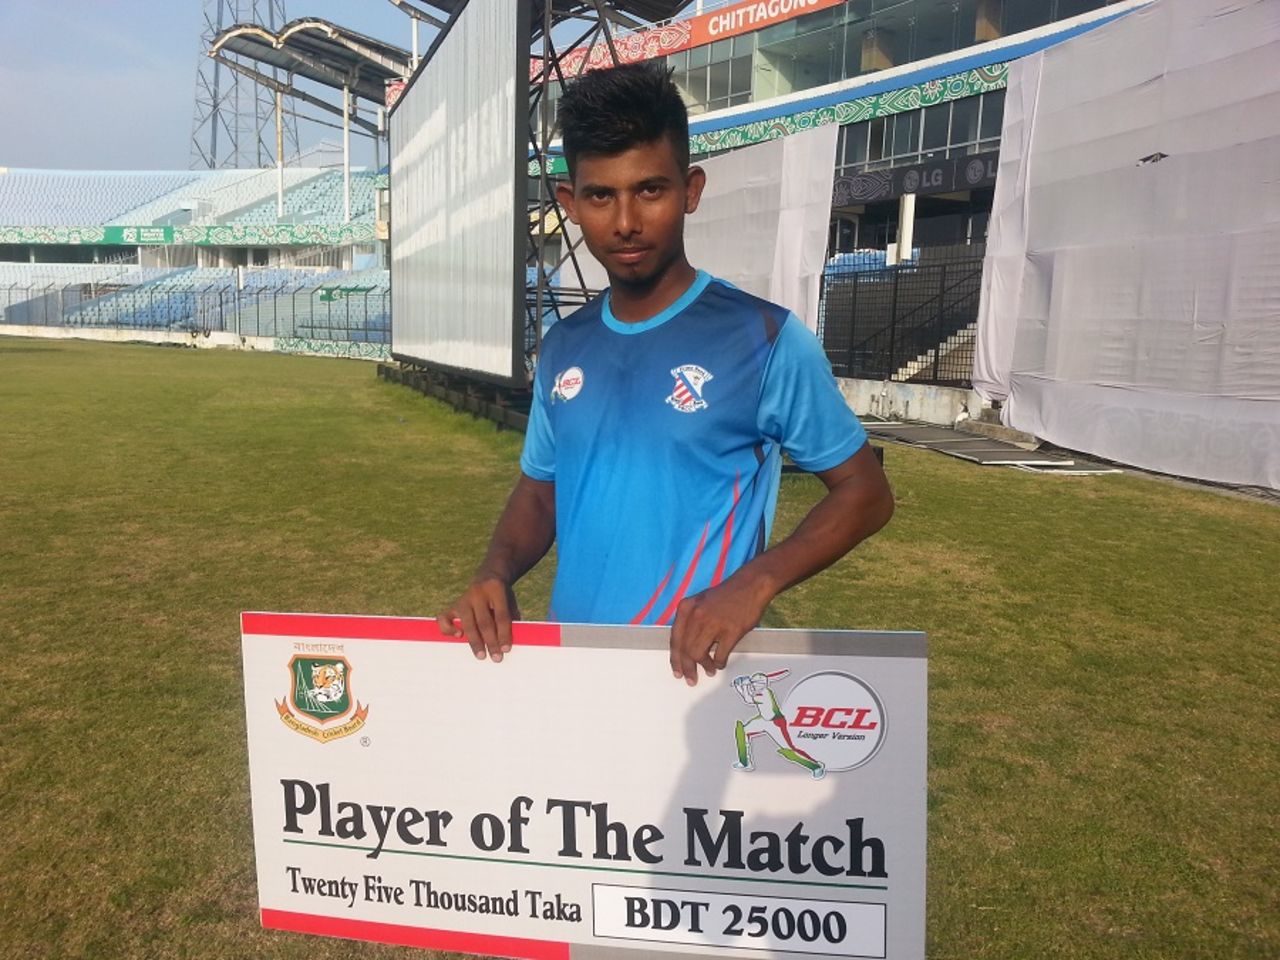 Mosaddek Hossain's second-innings century got him the Man-of-the-Match award, South Zone v East Zone, Chittagong, Bangladesh Cricket League, May 27, 2015